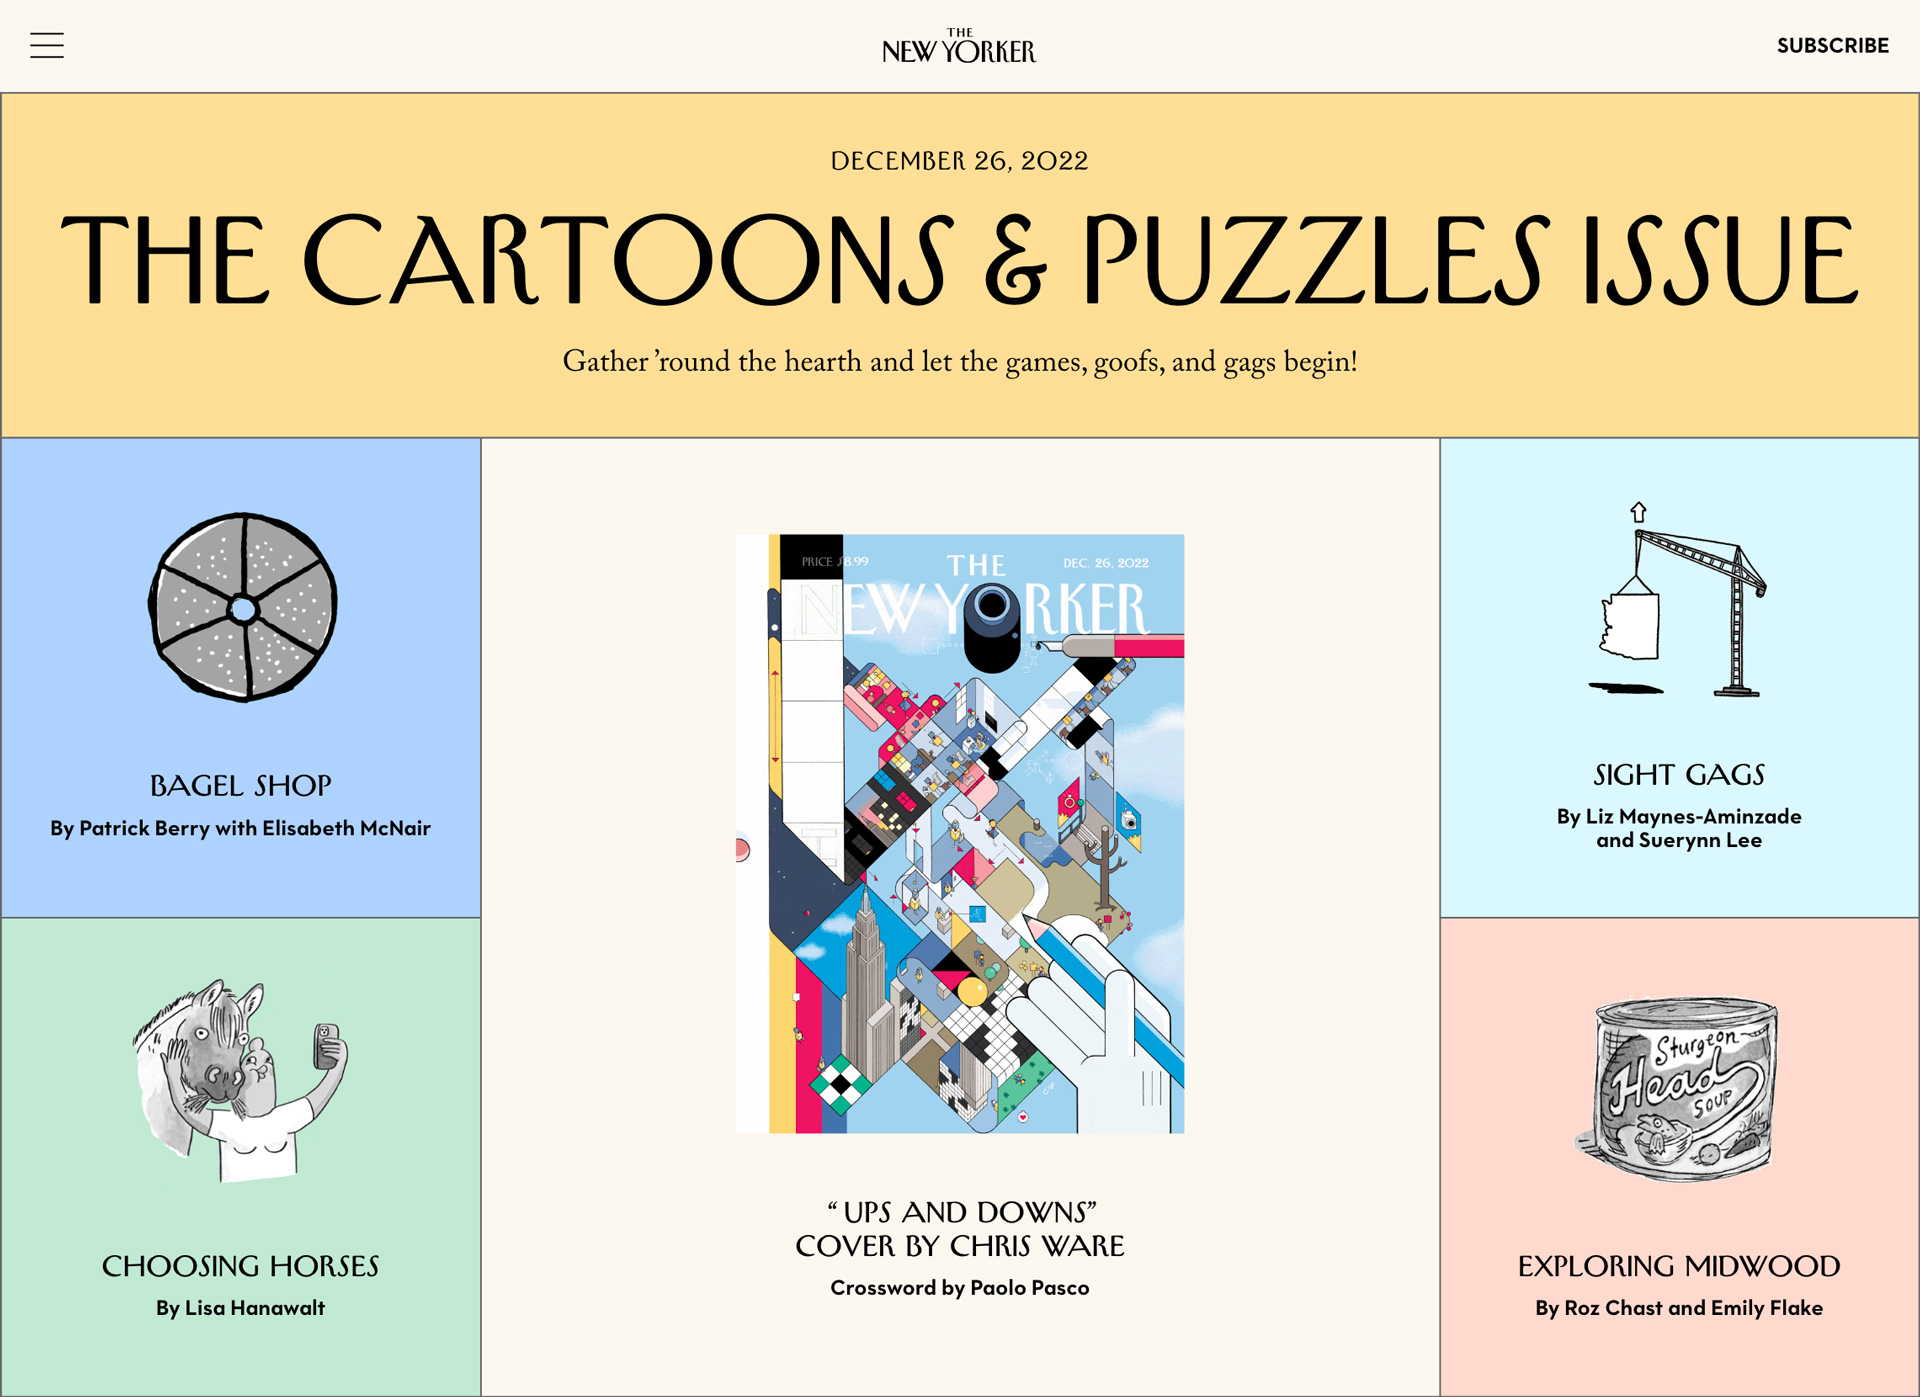 The Cartoons & Puzzles Issue